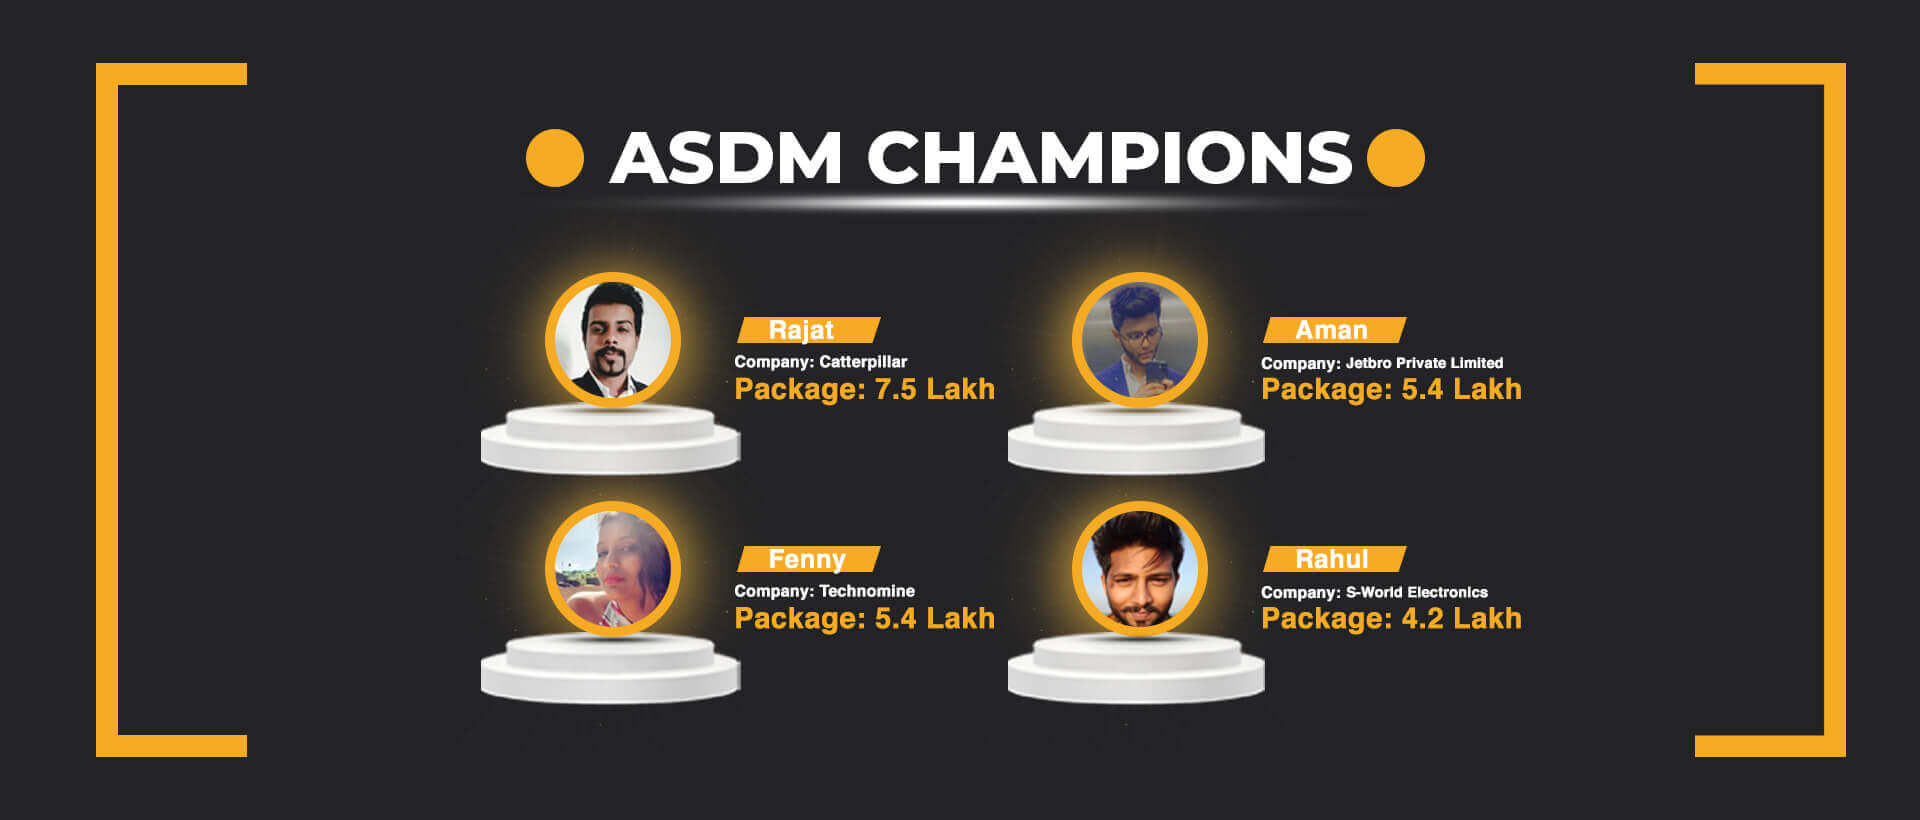 ® ASDM CHAMPIONS ®

 
  
 
 

Company: Jetbro Private Limited
ed ty 5 Lakh Package: 5.4 Lakh

J. EL TTT
__.— Company: S-World Electronics
hig LN E-T4] Package: 4.2 Lakh